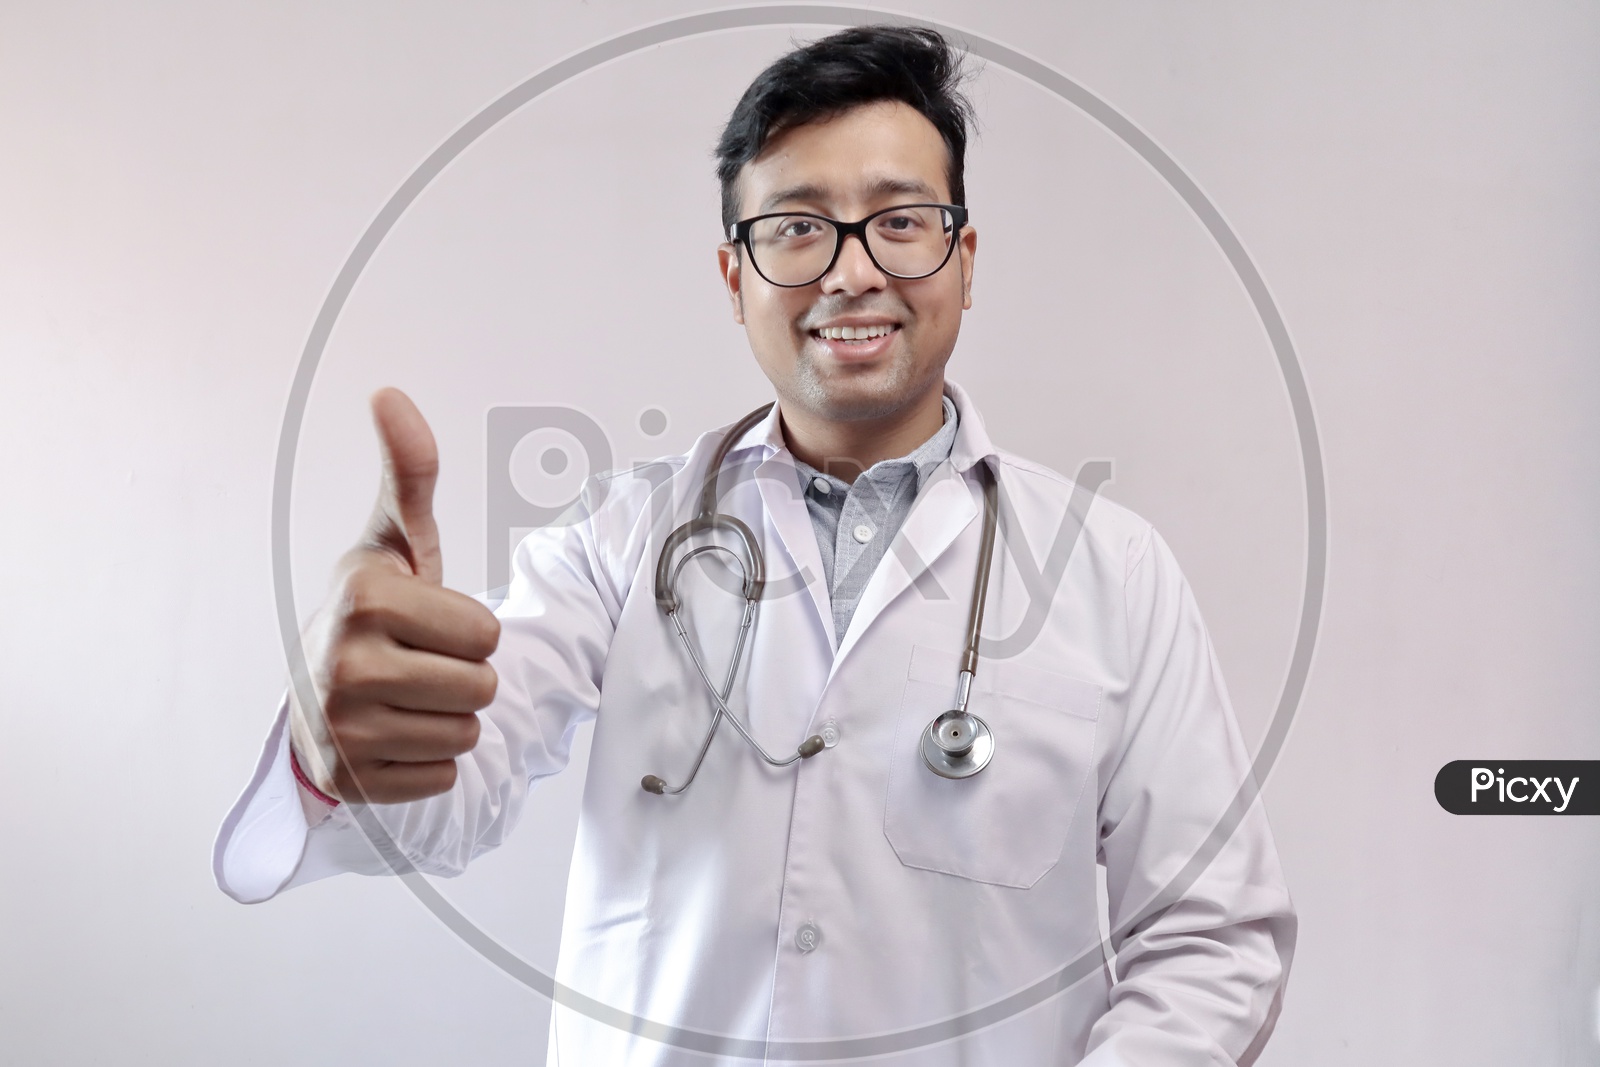 Male Indian Doctor In White Coat And Stethoscope Showing Thumbs Up In Confidence